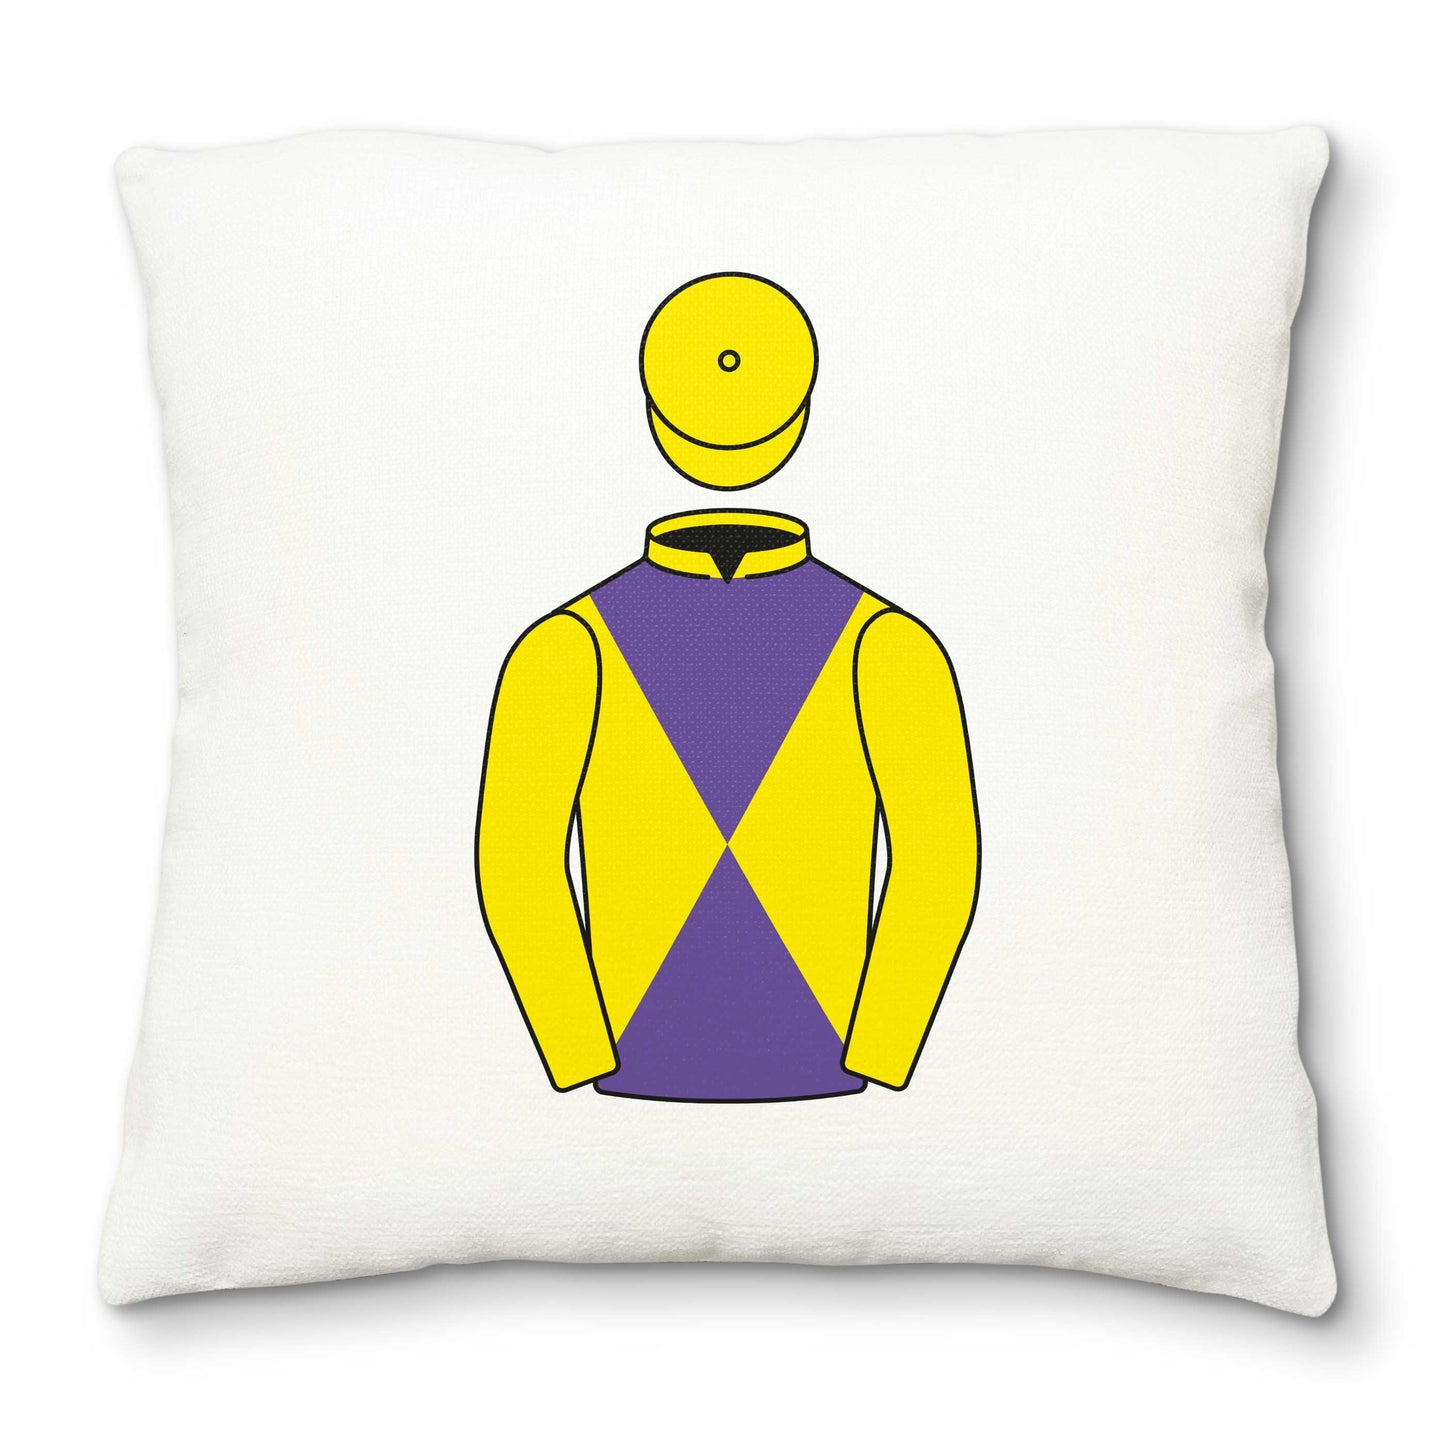 Paul Murphy Deluxe Cushion Cover - Deluxe Cushion Cover - Hacked Up